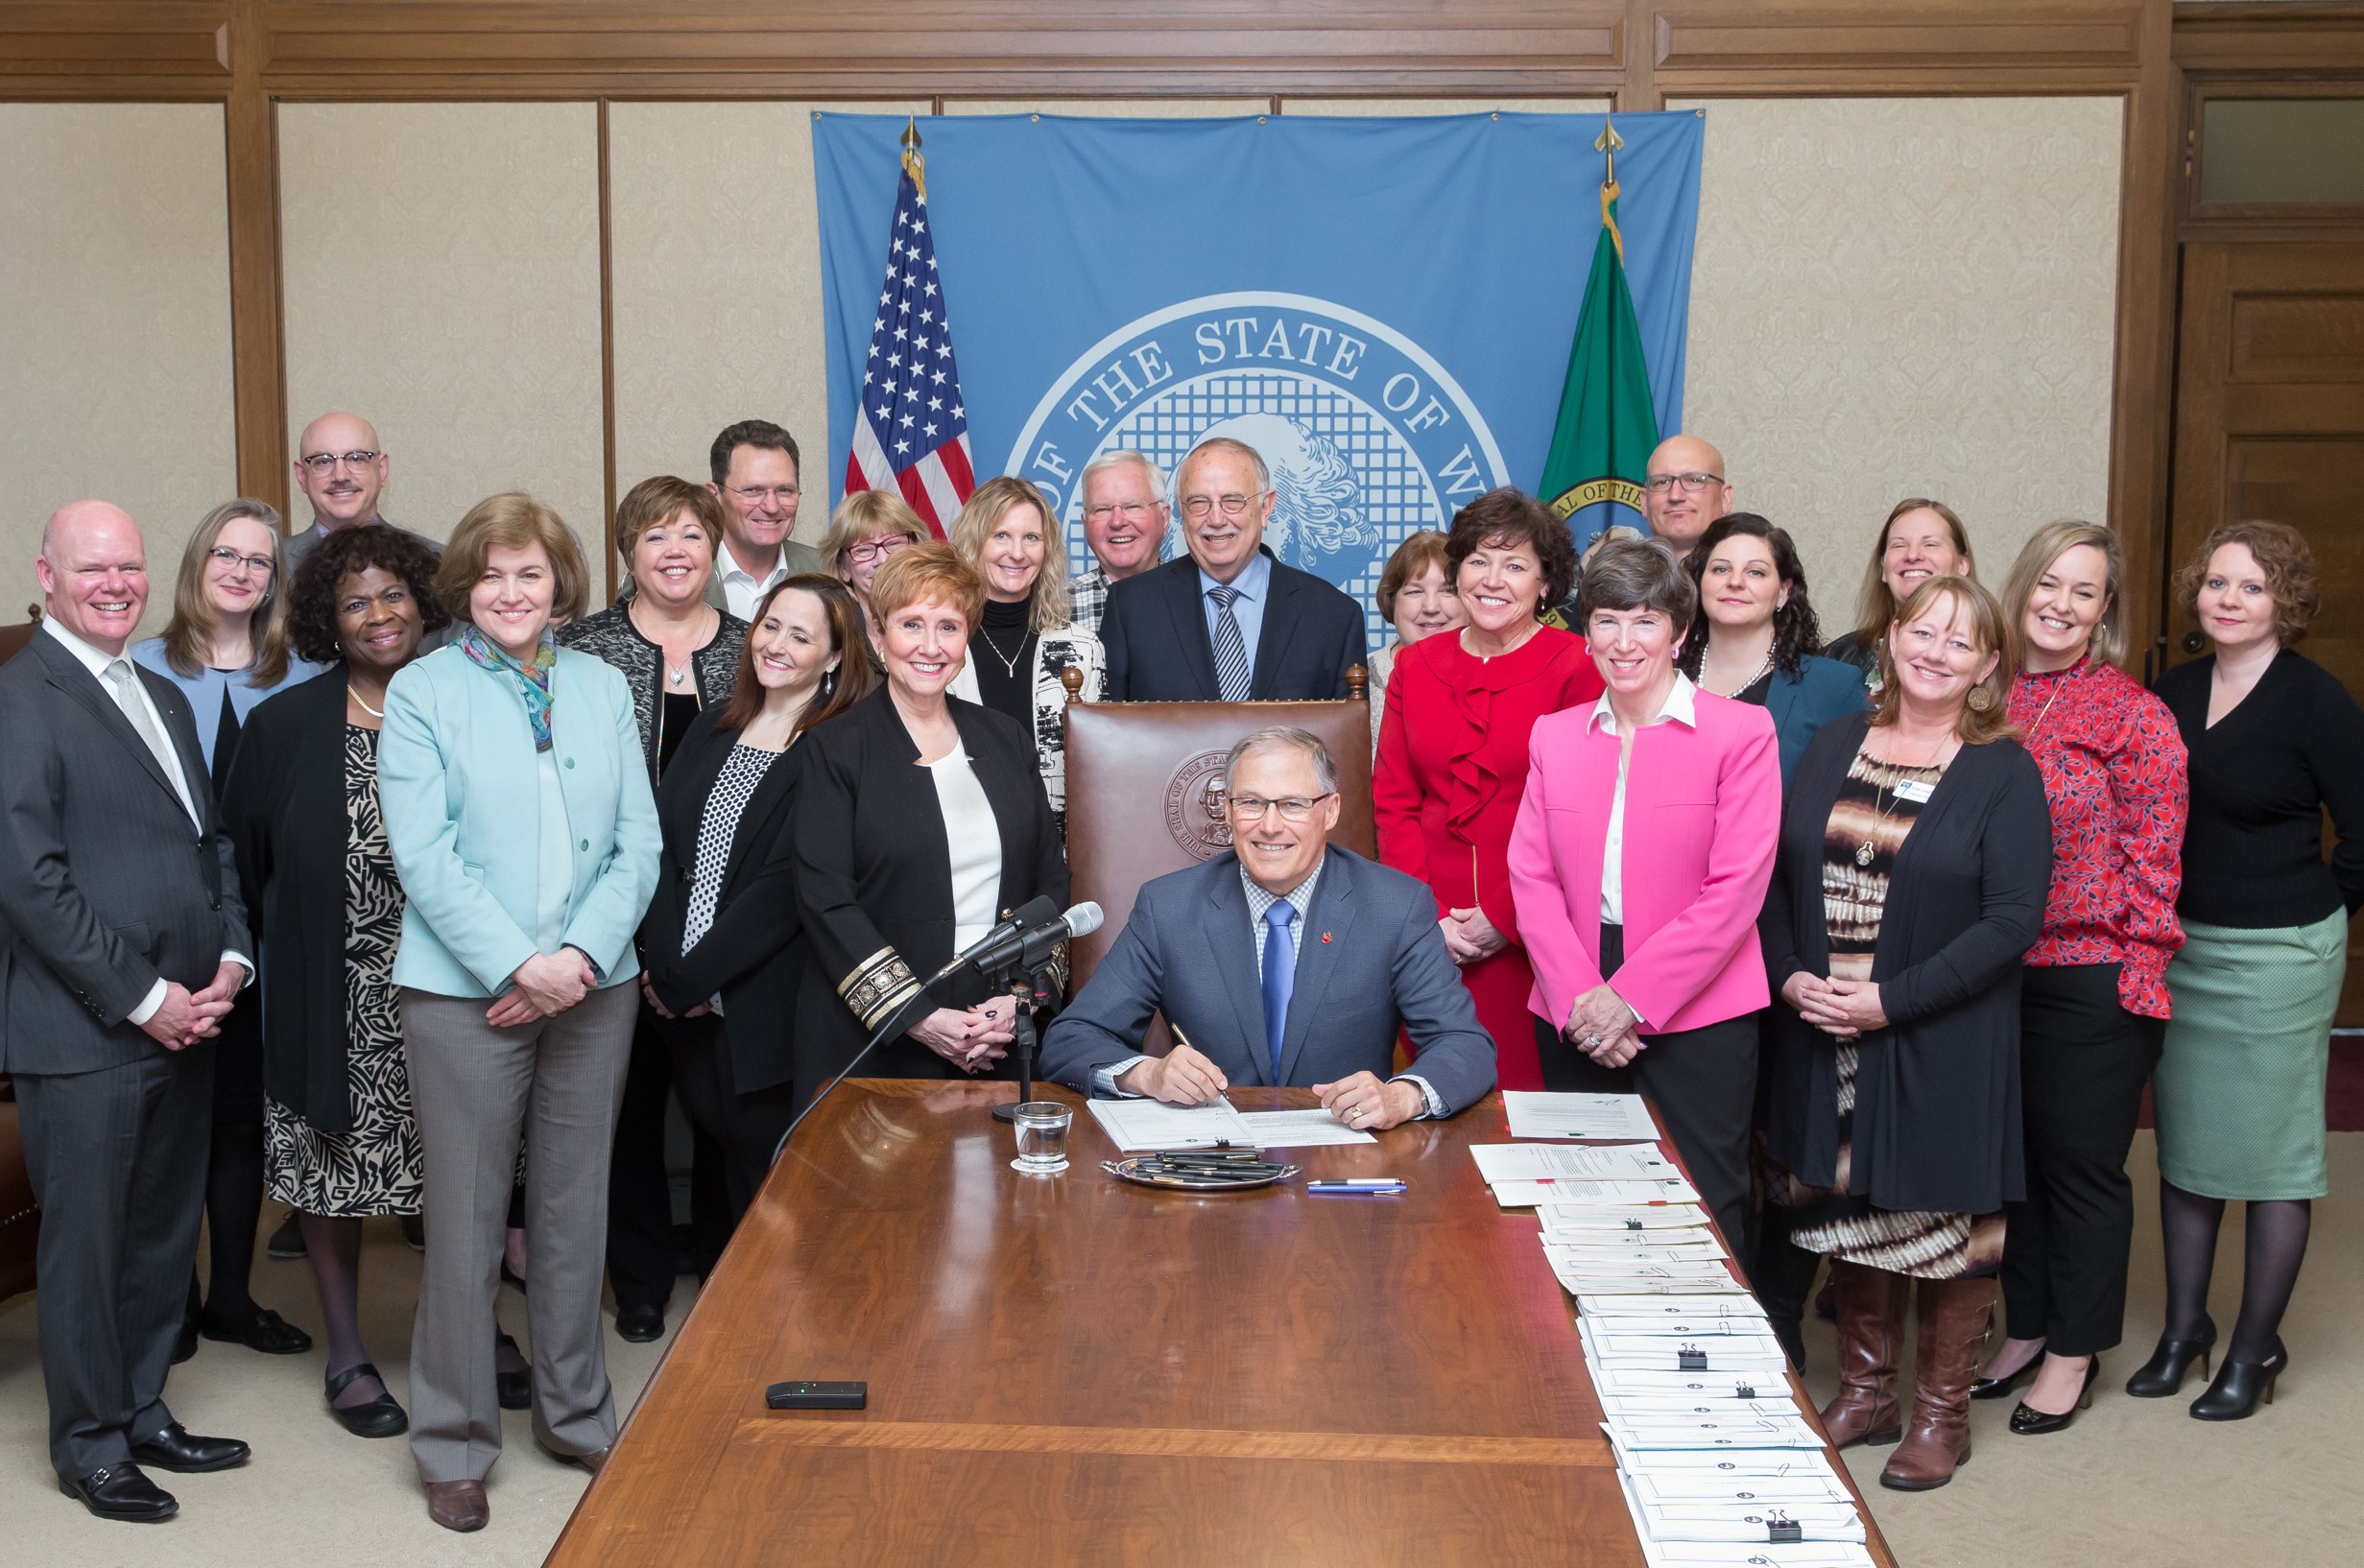 Governor Inslee signing SB 6362